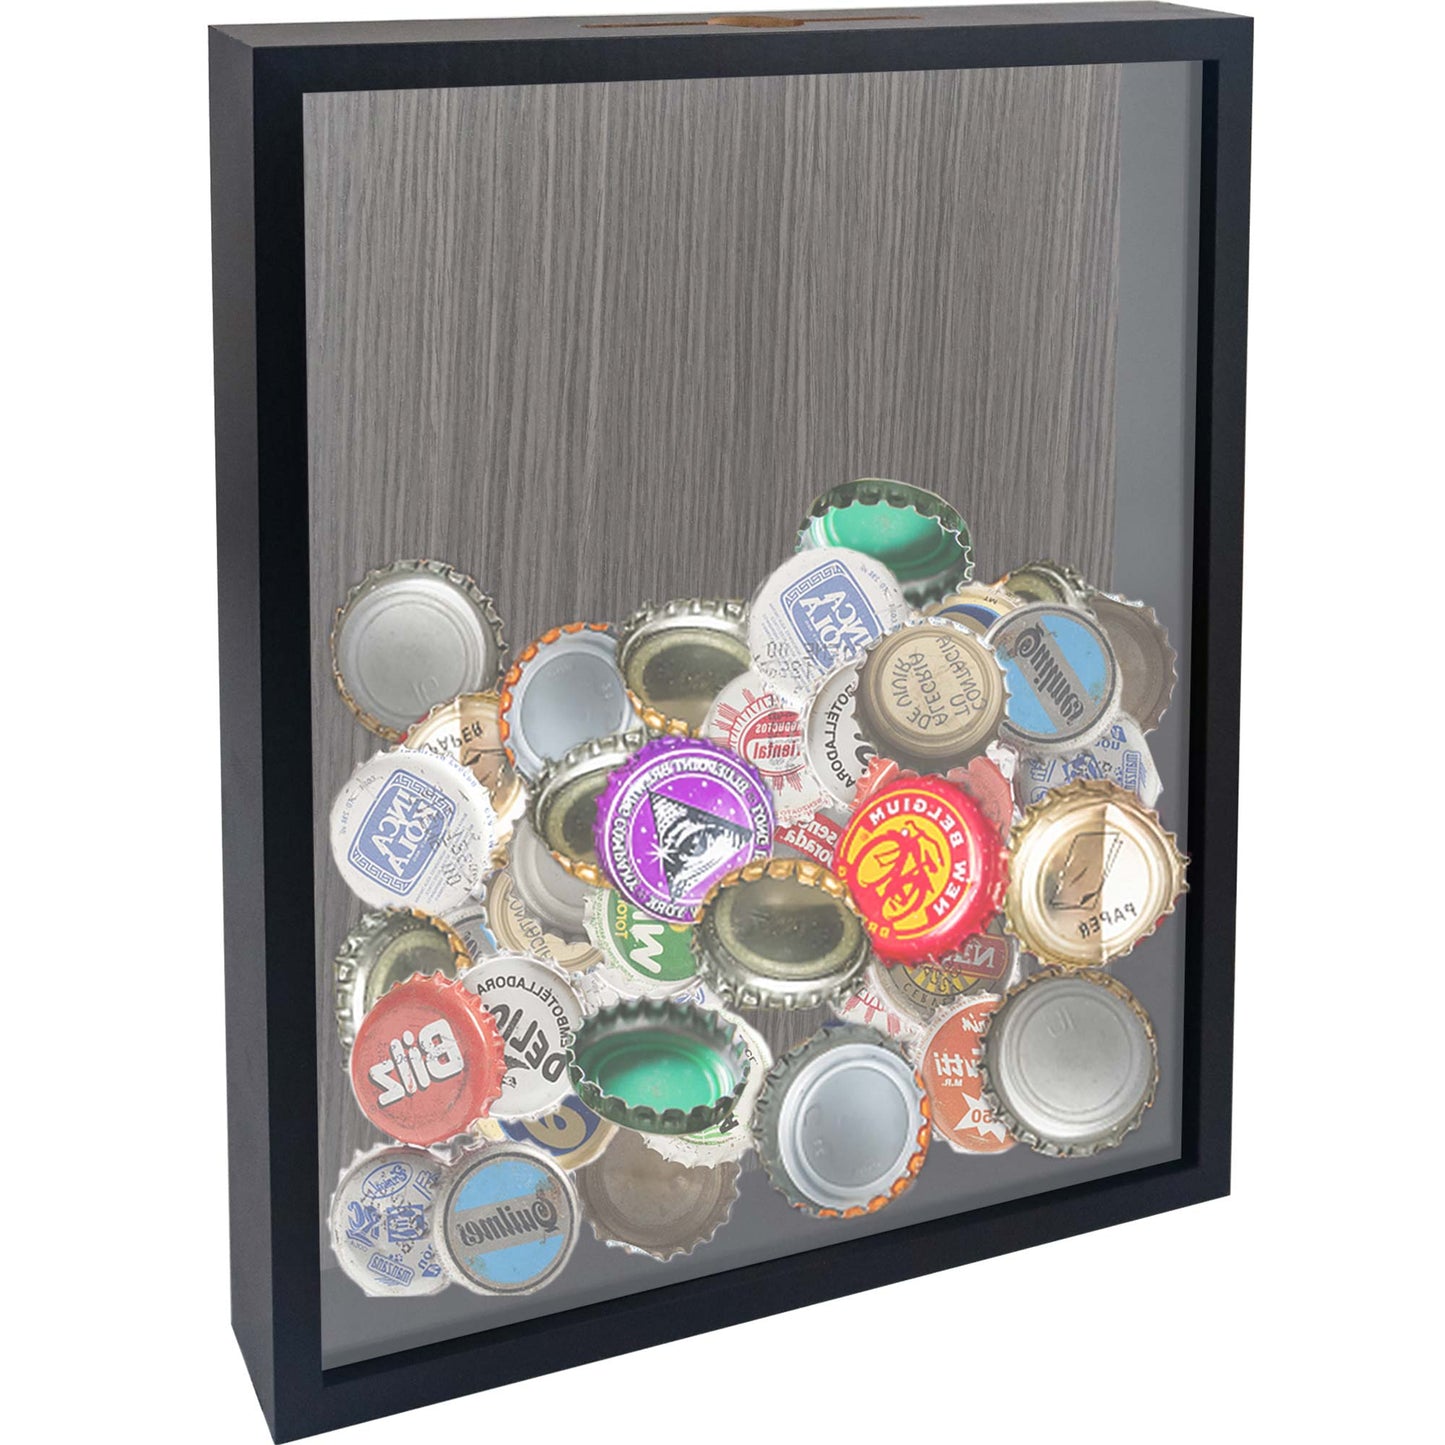 Shadow Box Frame Wood Collection Case With Slot on top - 4 Sizes Available